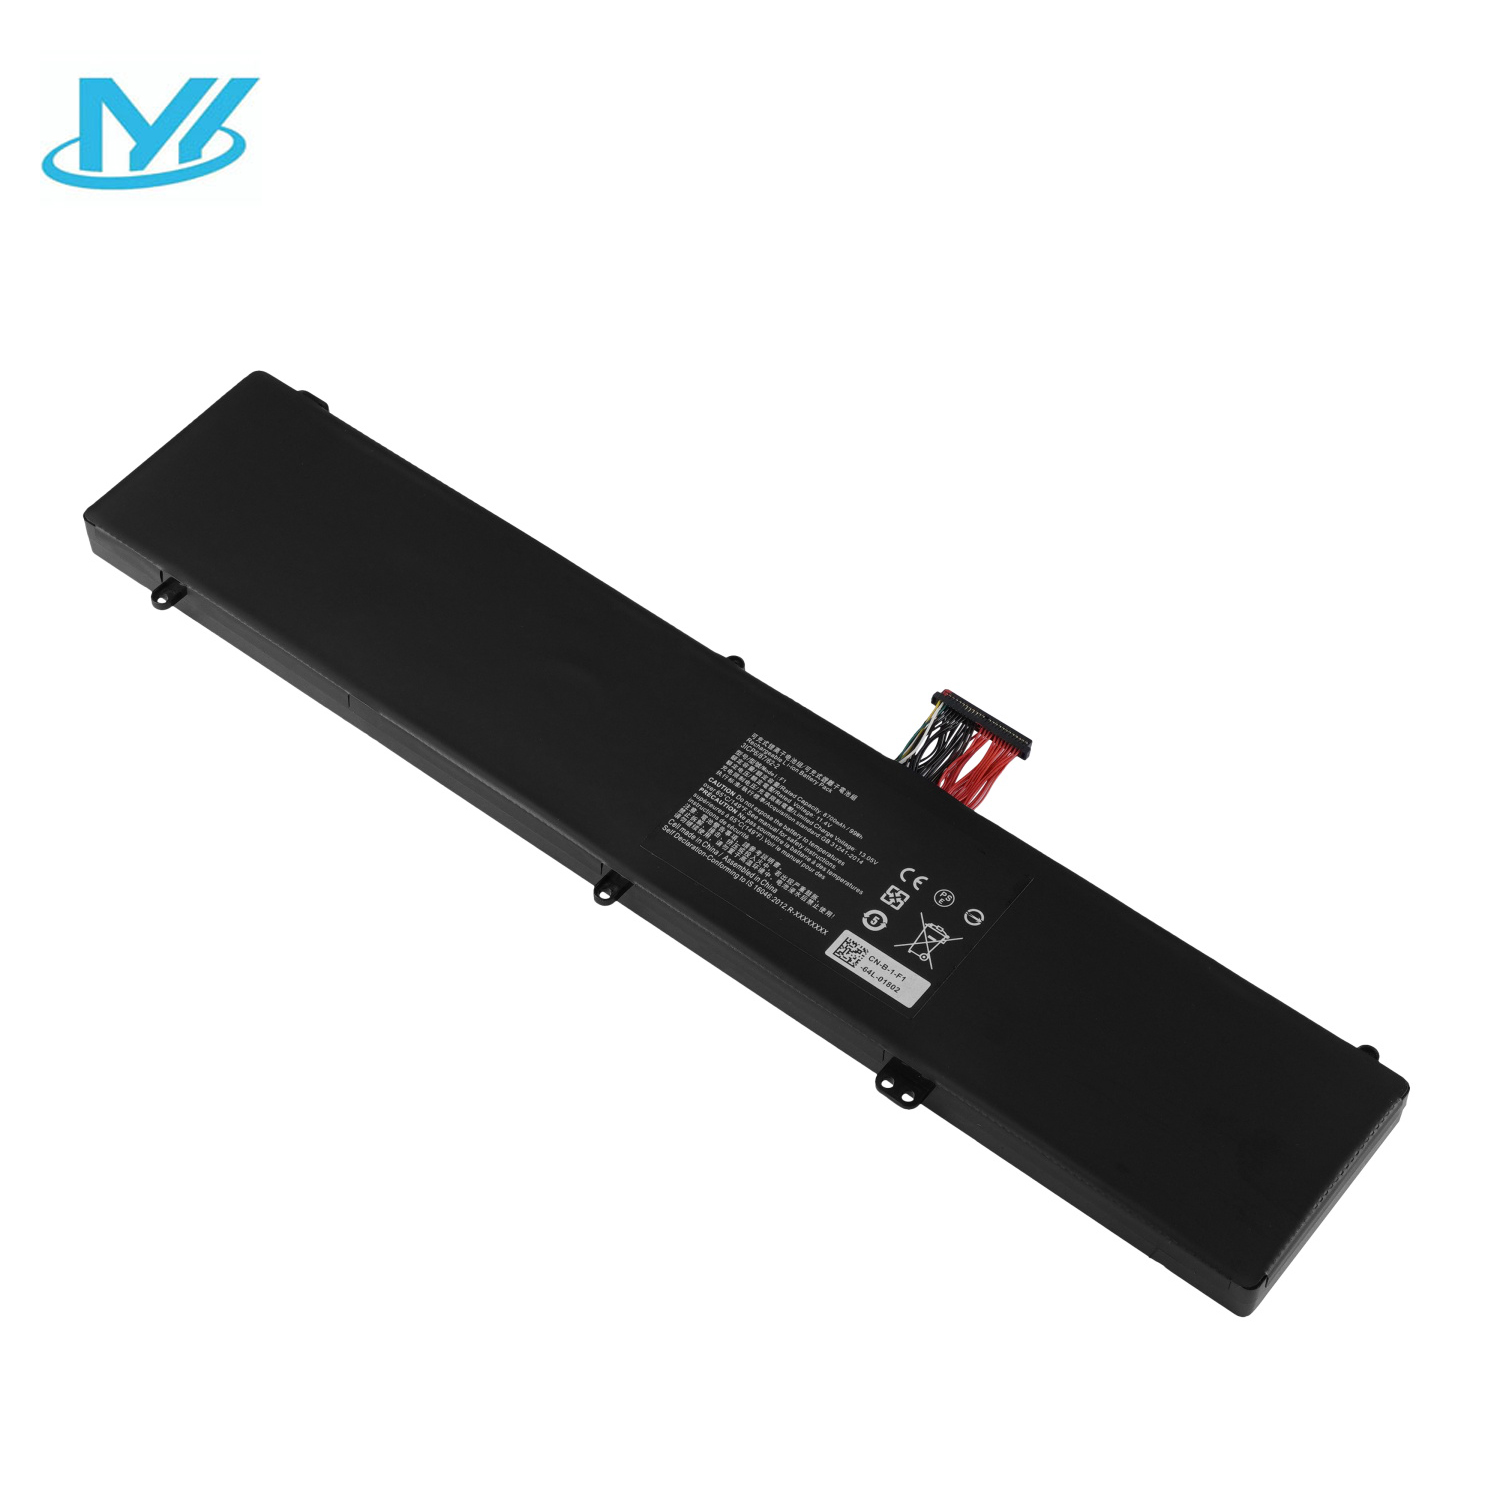 RZ01-0166 rechargeable lithium ion Notebook battery Laptop battery 11.4V 99Wh 8700mAh